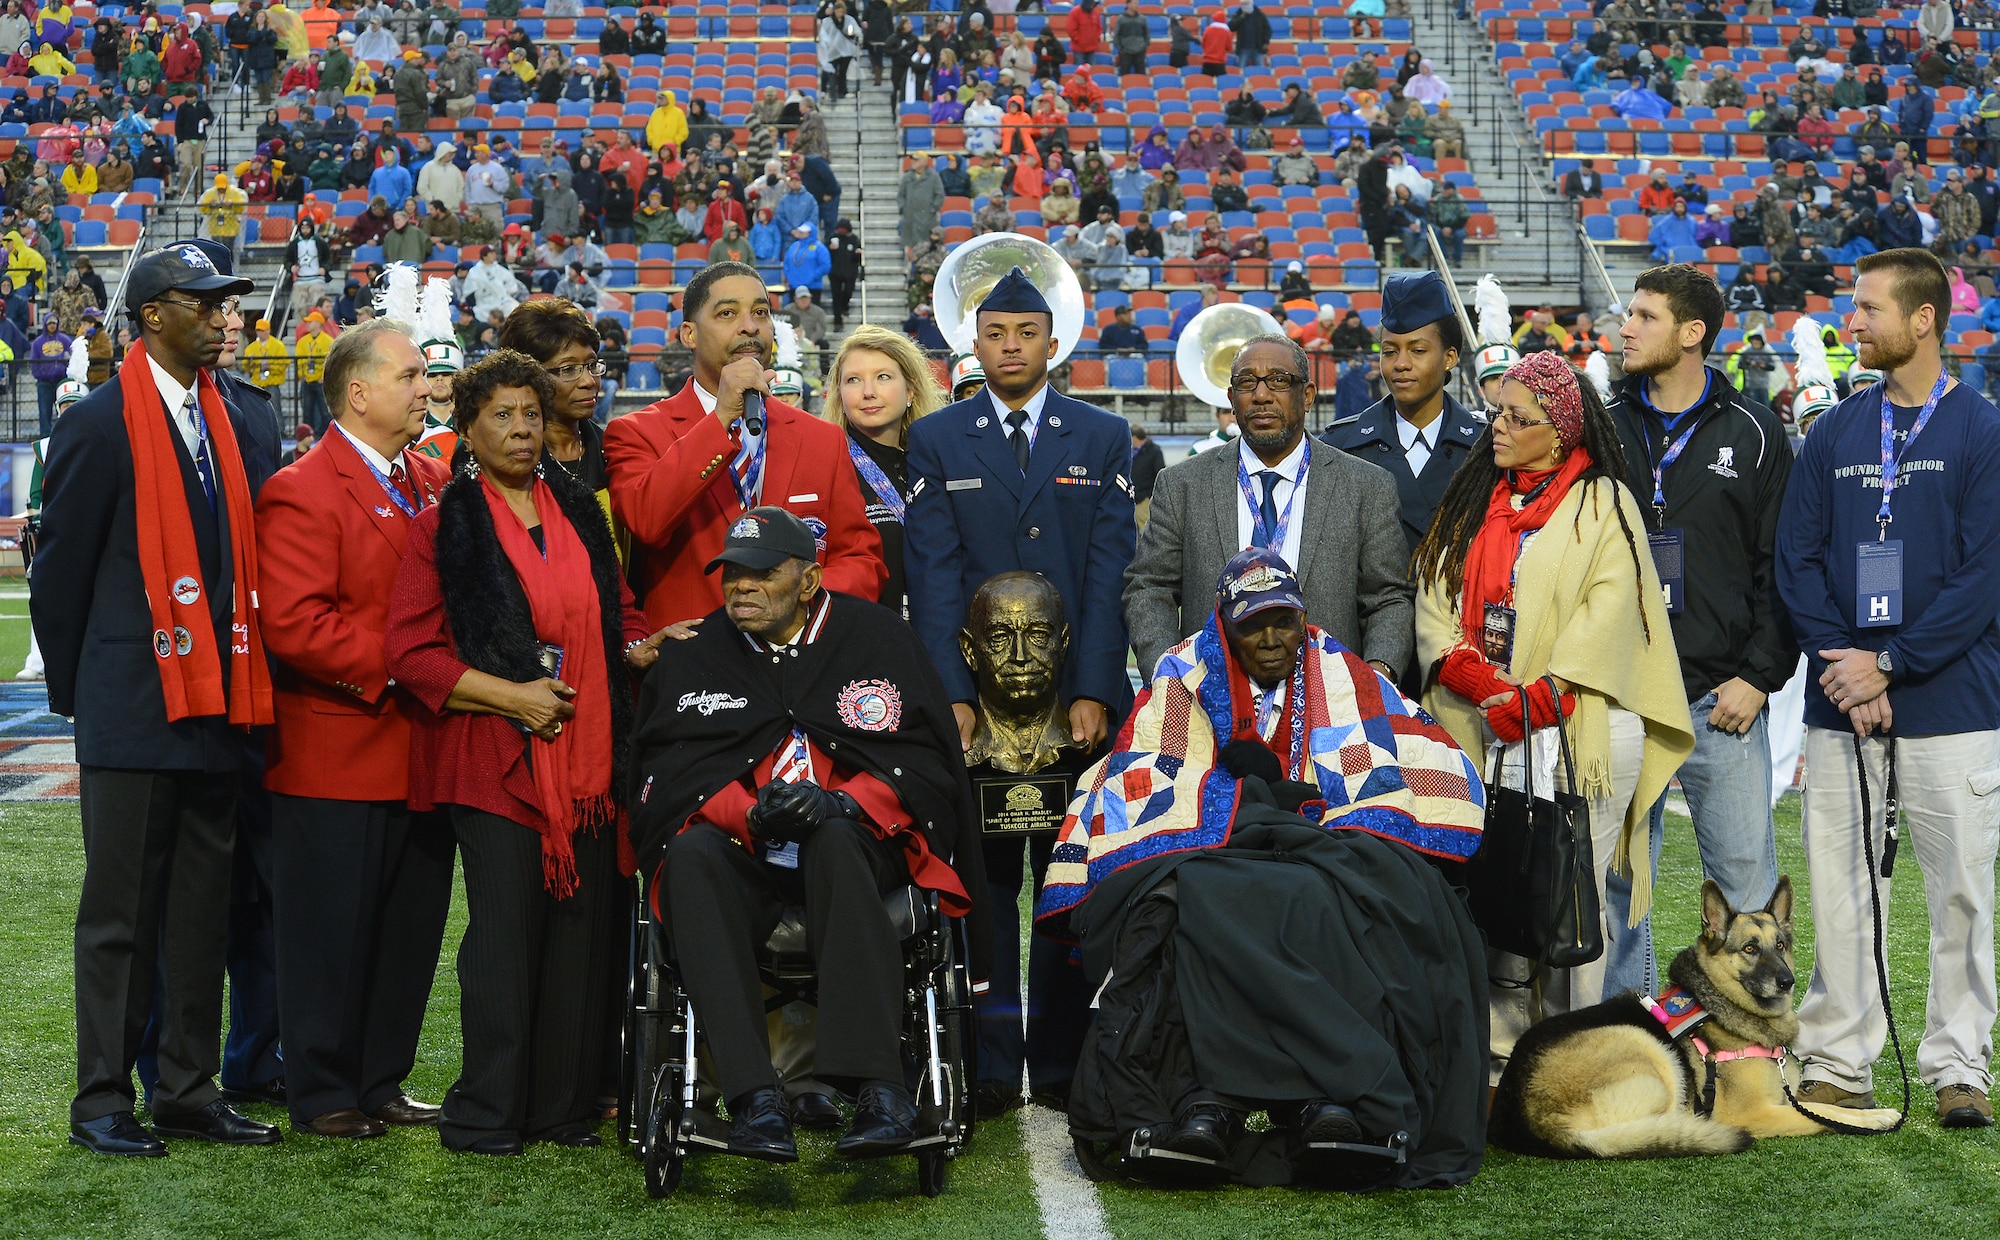 Tuskegee Airmen Homer Hogues and Calvin Spann receive the Omar N. Bradley "Spirit of Independence Award" on behalf of all of the Tuskegee Airmen Dec. 27, 2014, during the Duck Commander Independence Bowl at Shreveport, La. The Omar N. Bradley "Spirit of Independence Award is named after U.S. Army General Omar N. Bradley, who was the first to receive the award and the last individual in the United States armed forces to hold the 5-star rank. (U.S. Air Force photo/Senior Airman Joseph A. Pagán Jr.)